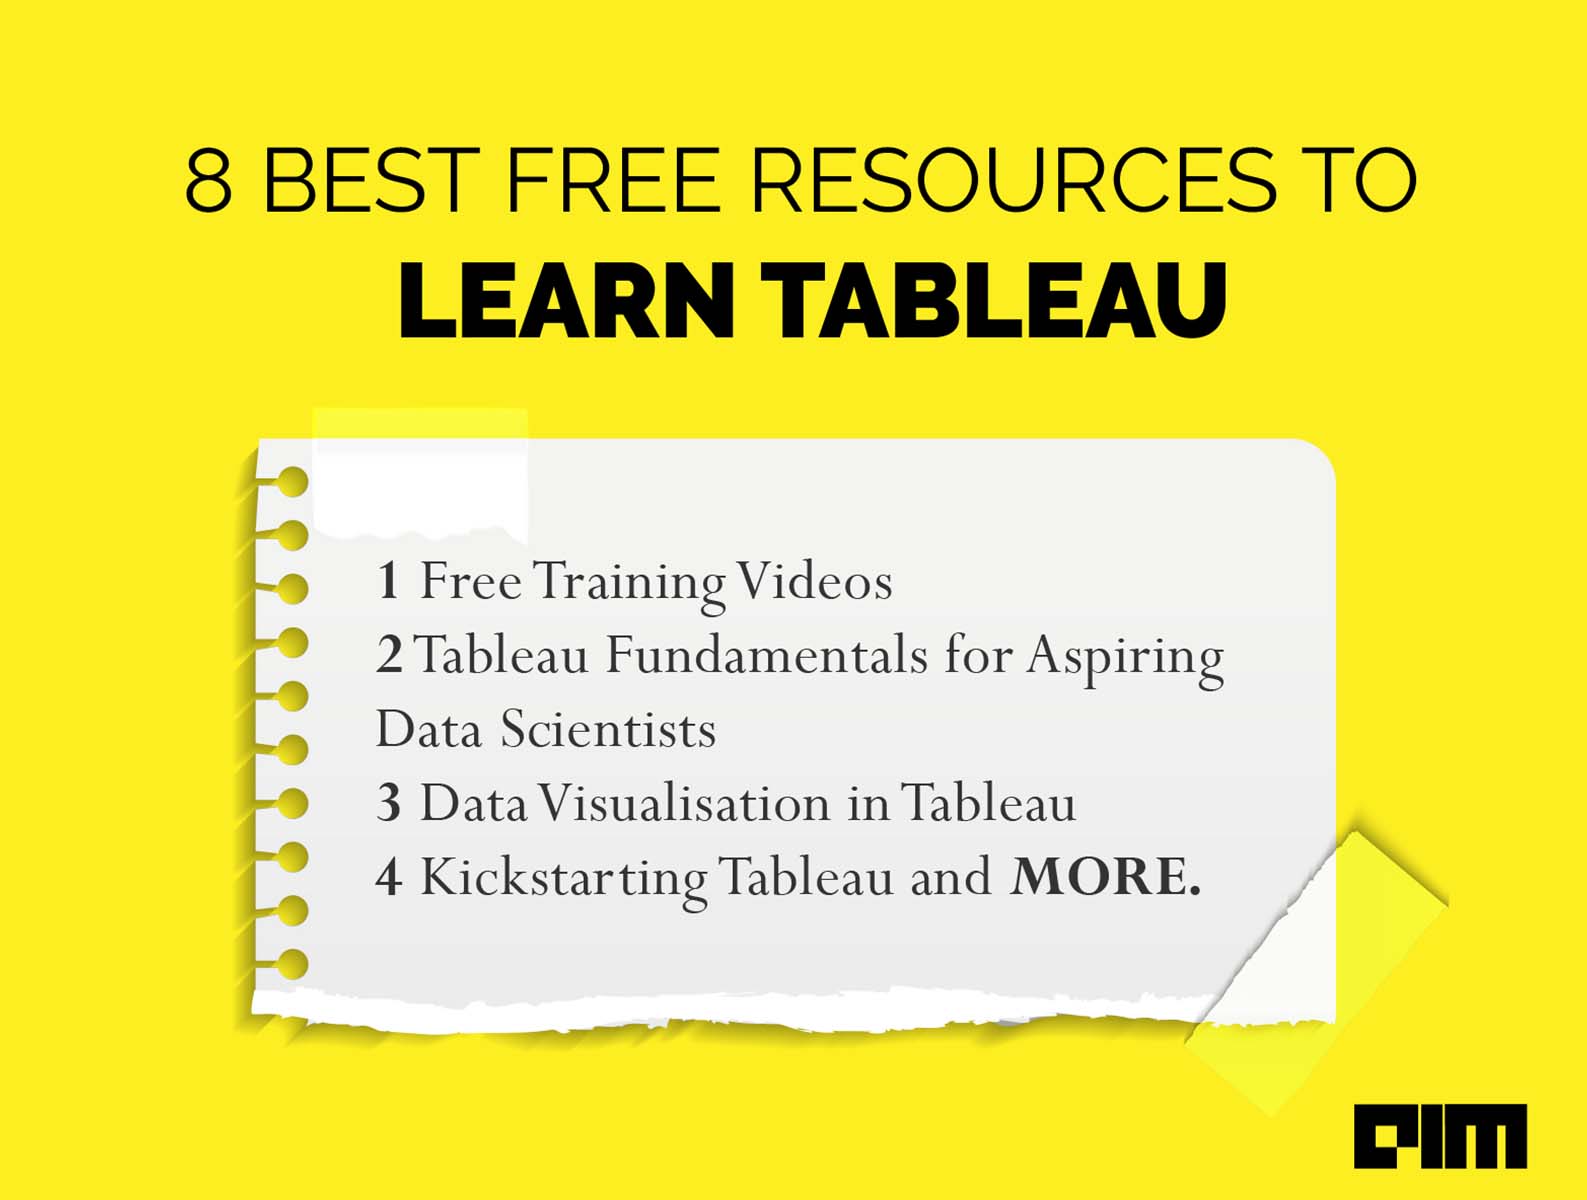 Retouch thin repetition 8 Best Free Resources To Learn Tableau